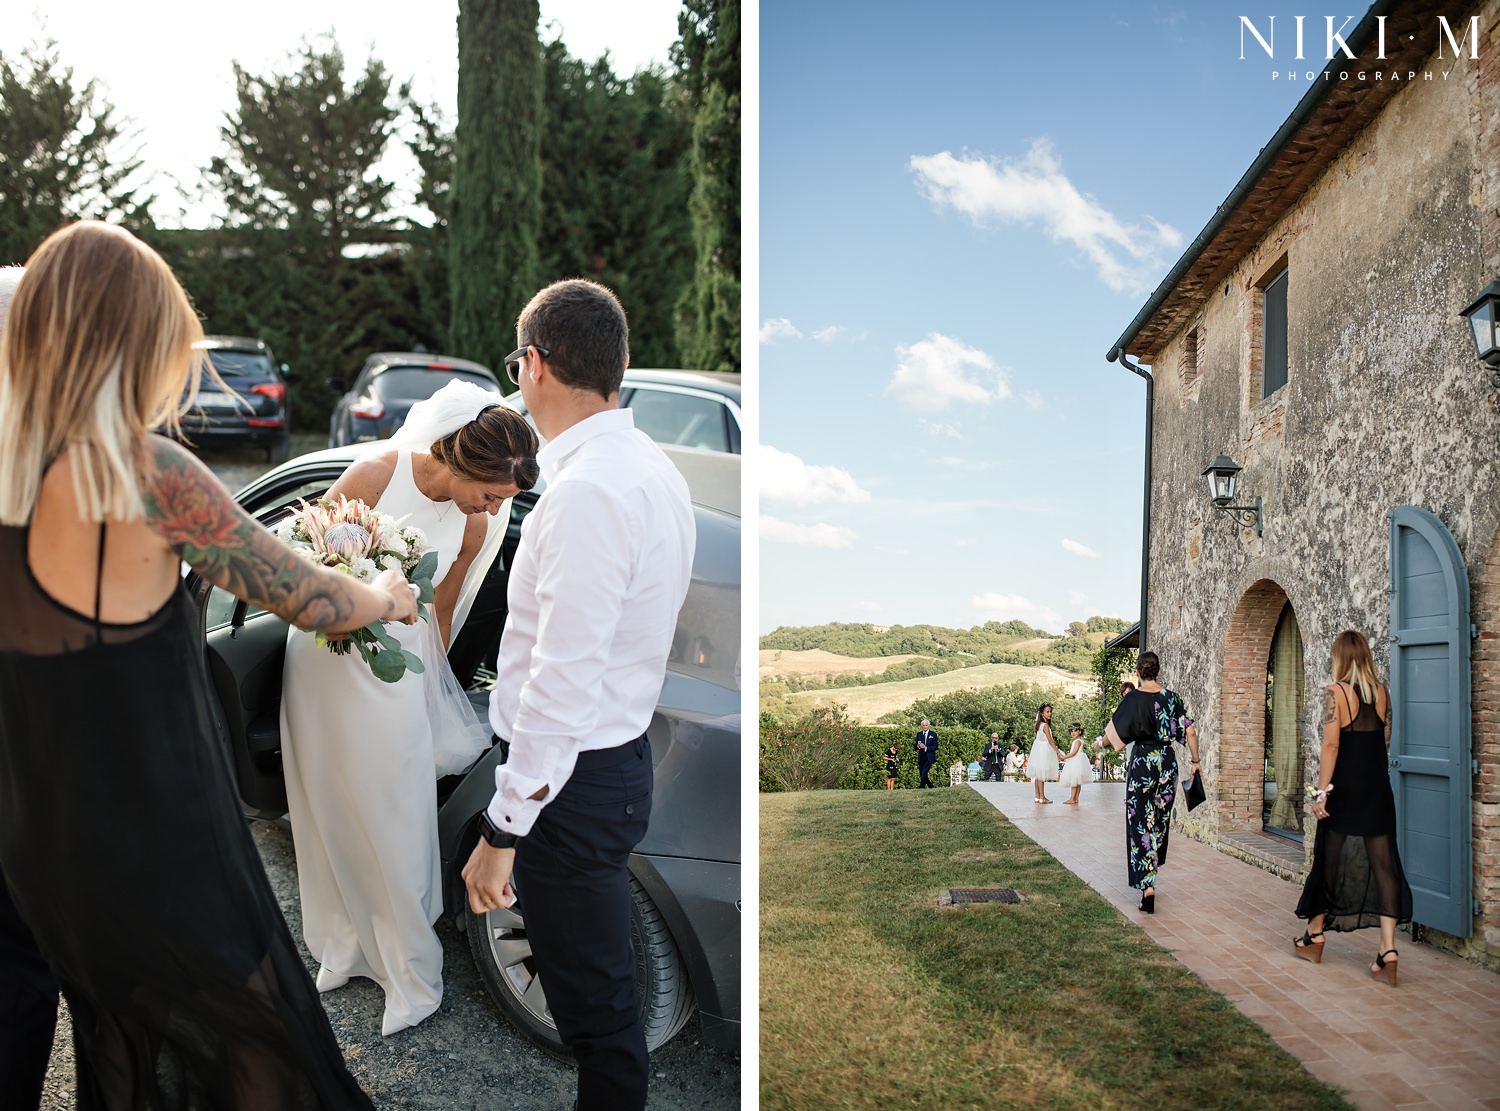 The bride arrives at her wedding ceremony in Tuscany